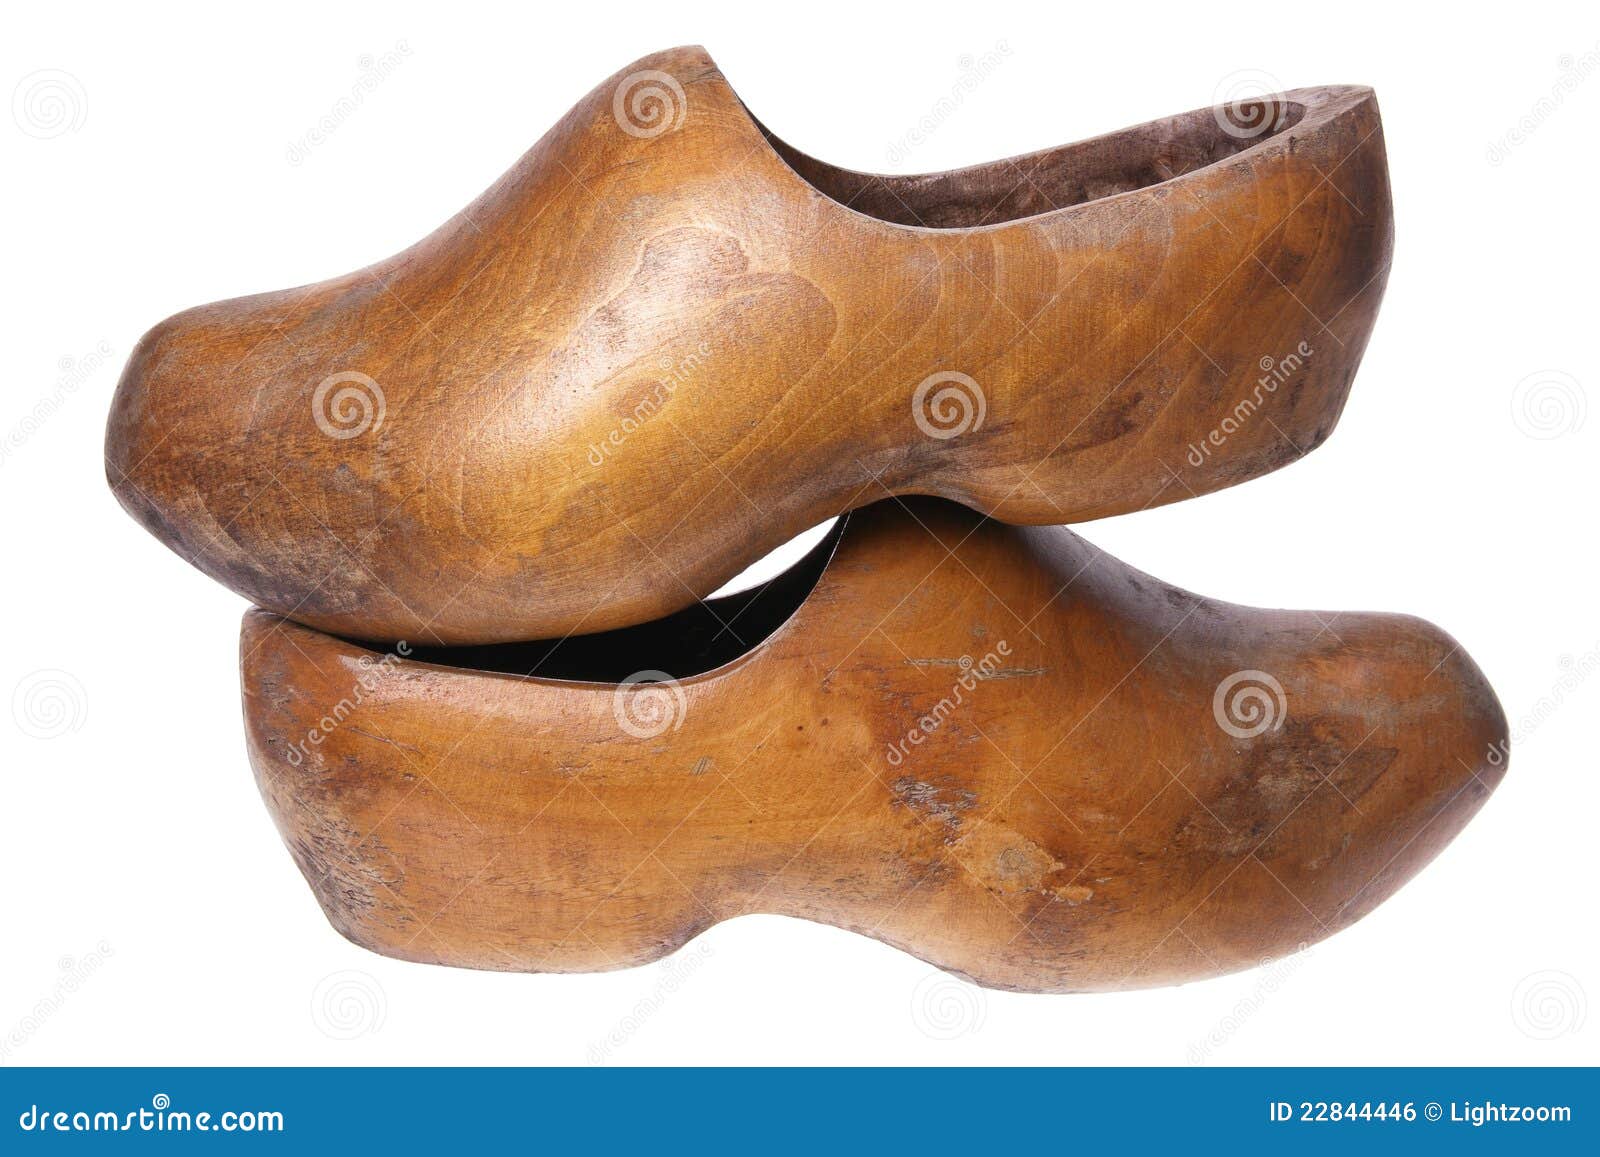 Wooden Dutch Clogs Royalty Free Stock Image - Image: 22844446